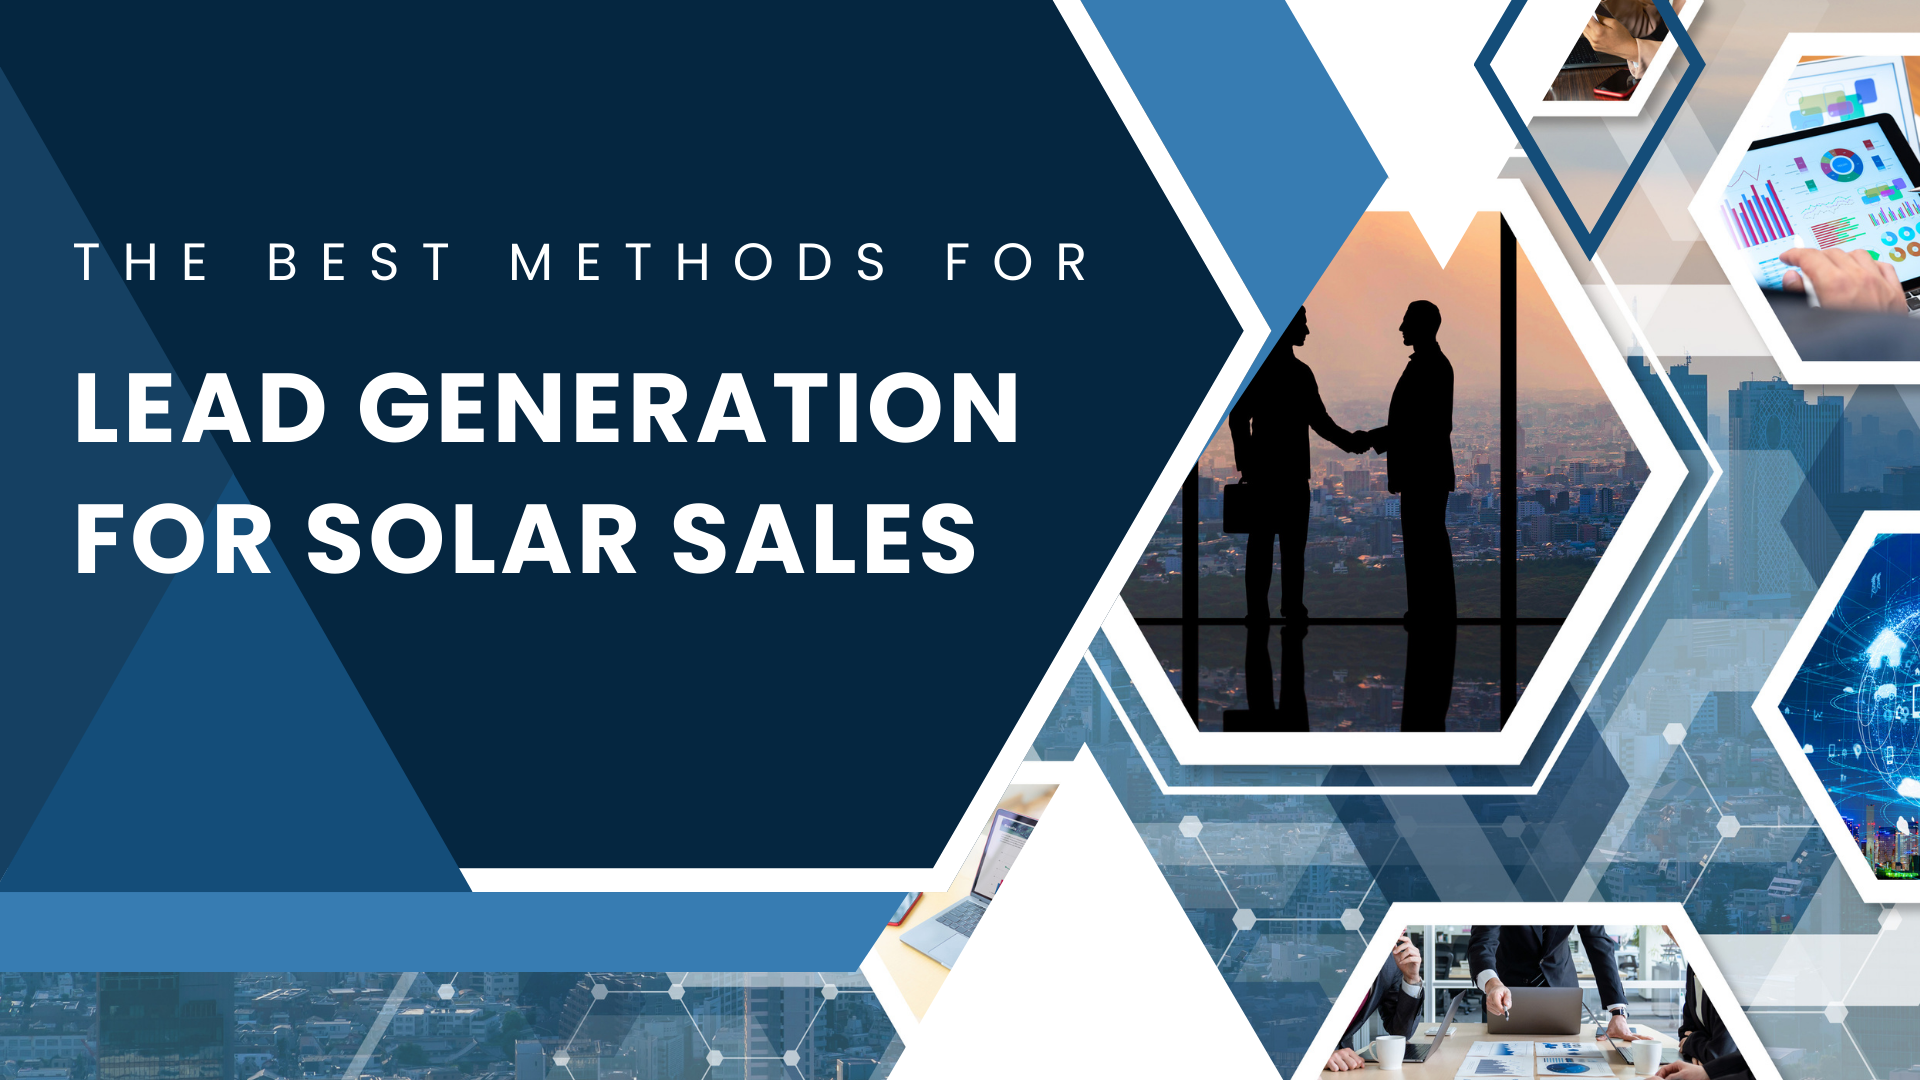 The best methods for lead generation for solar sales